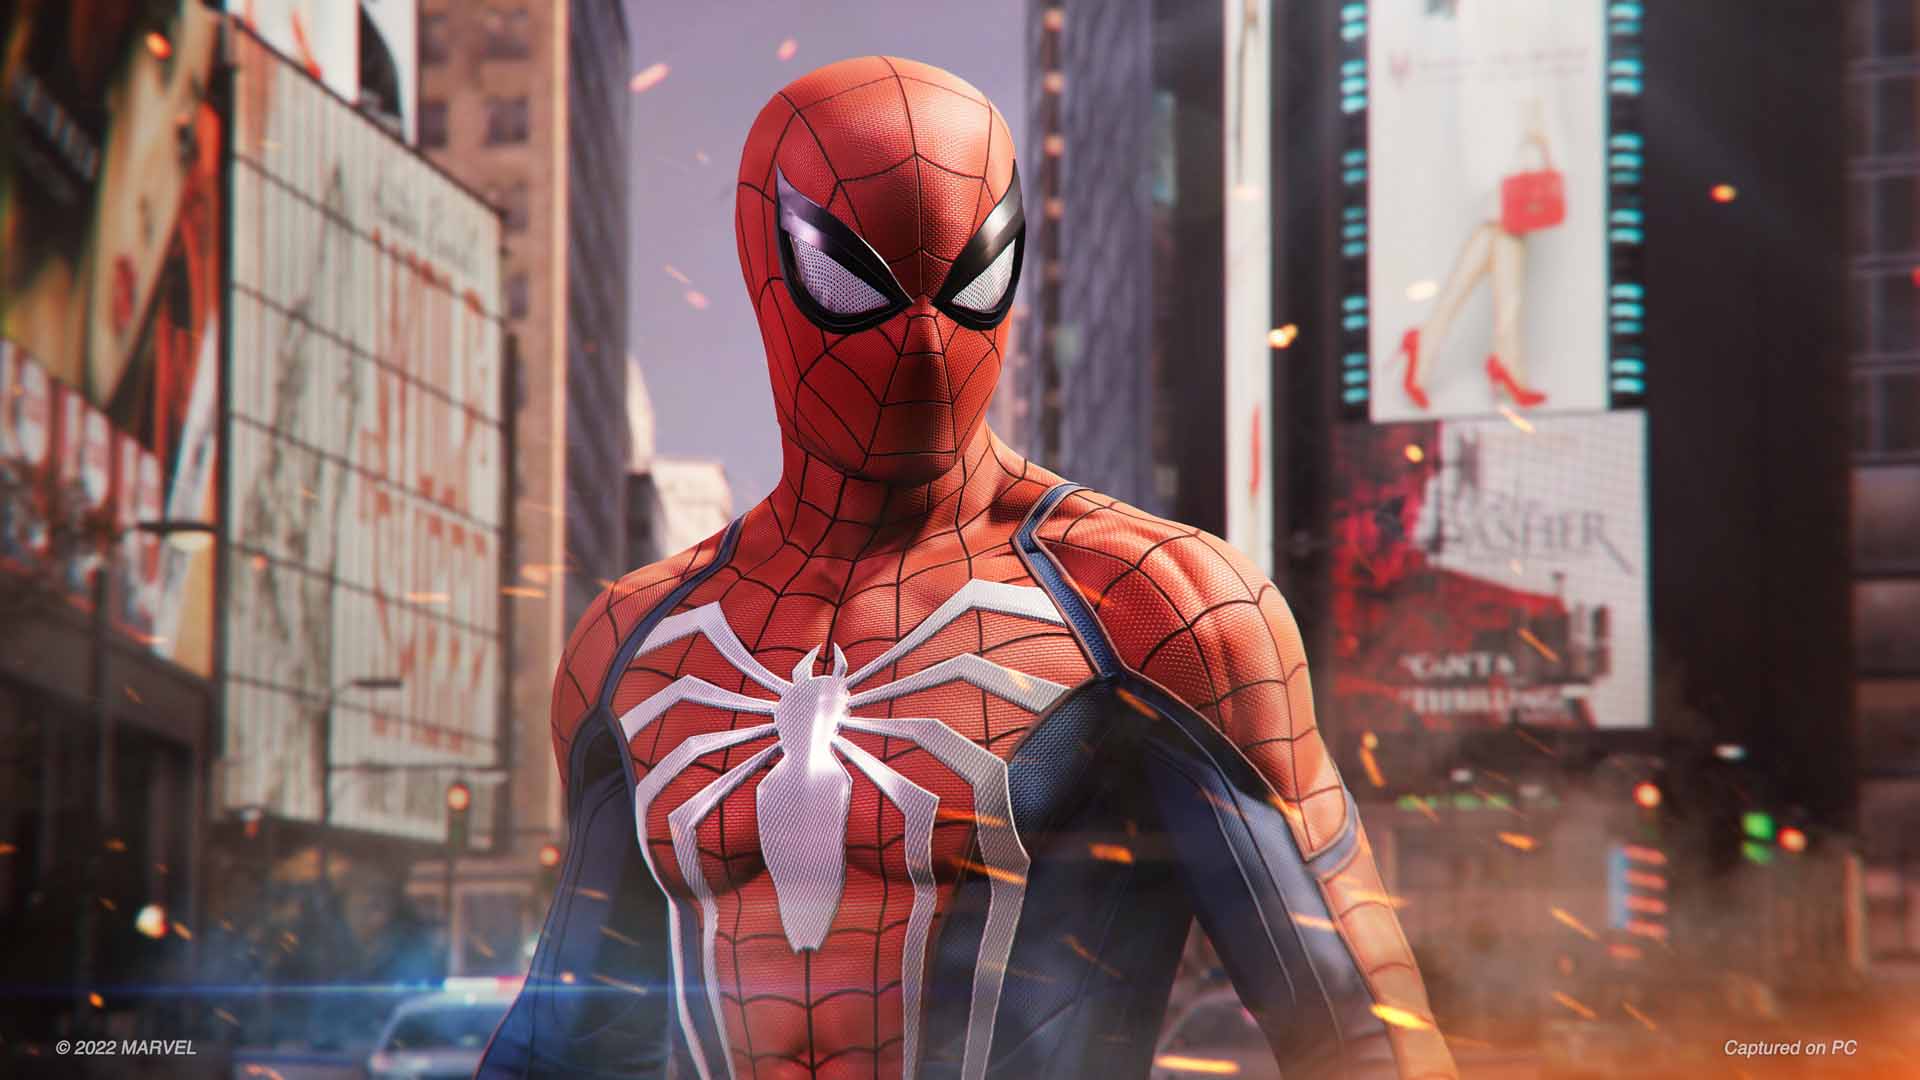 Marvel's Spider-Man Remastered PC review